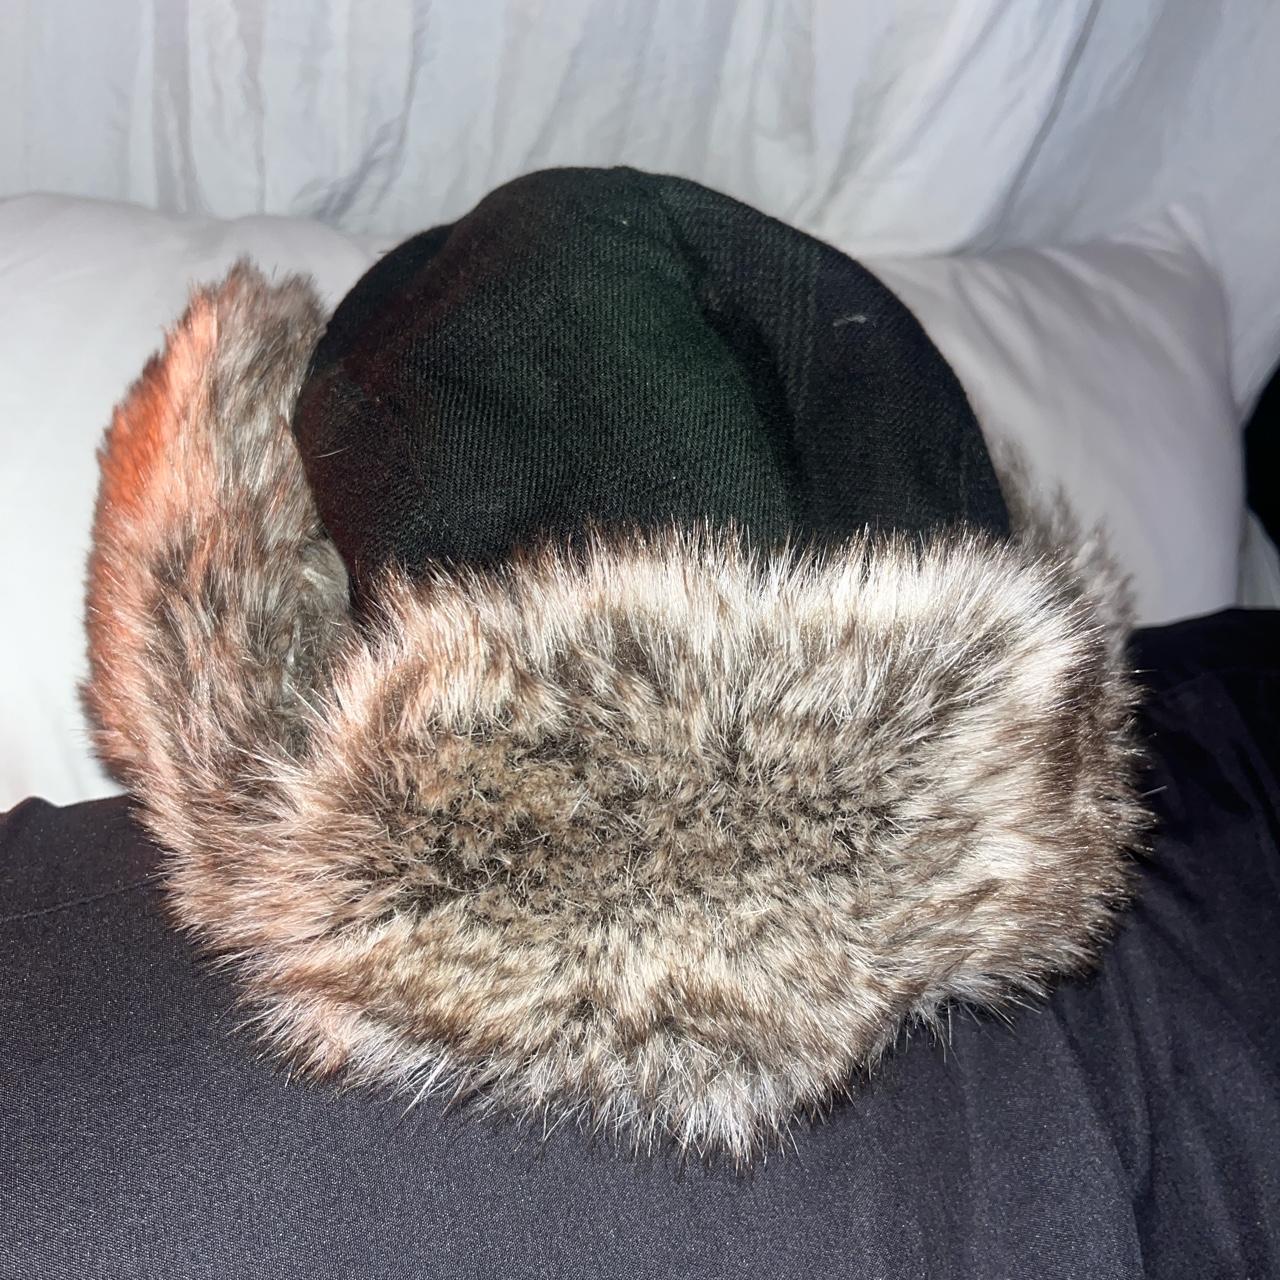 Men's Black and Green Hat (4)